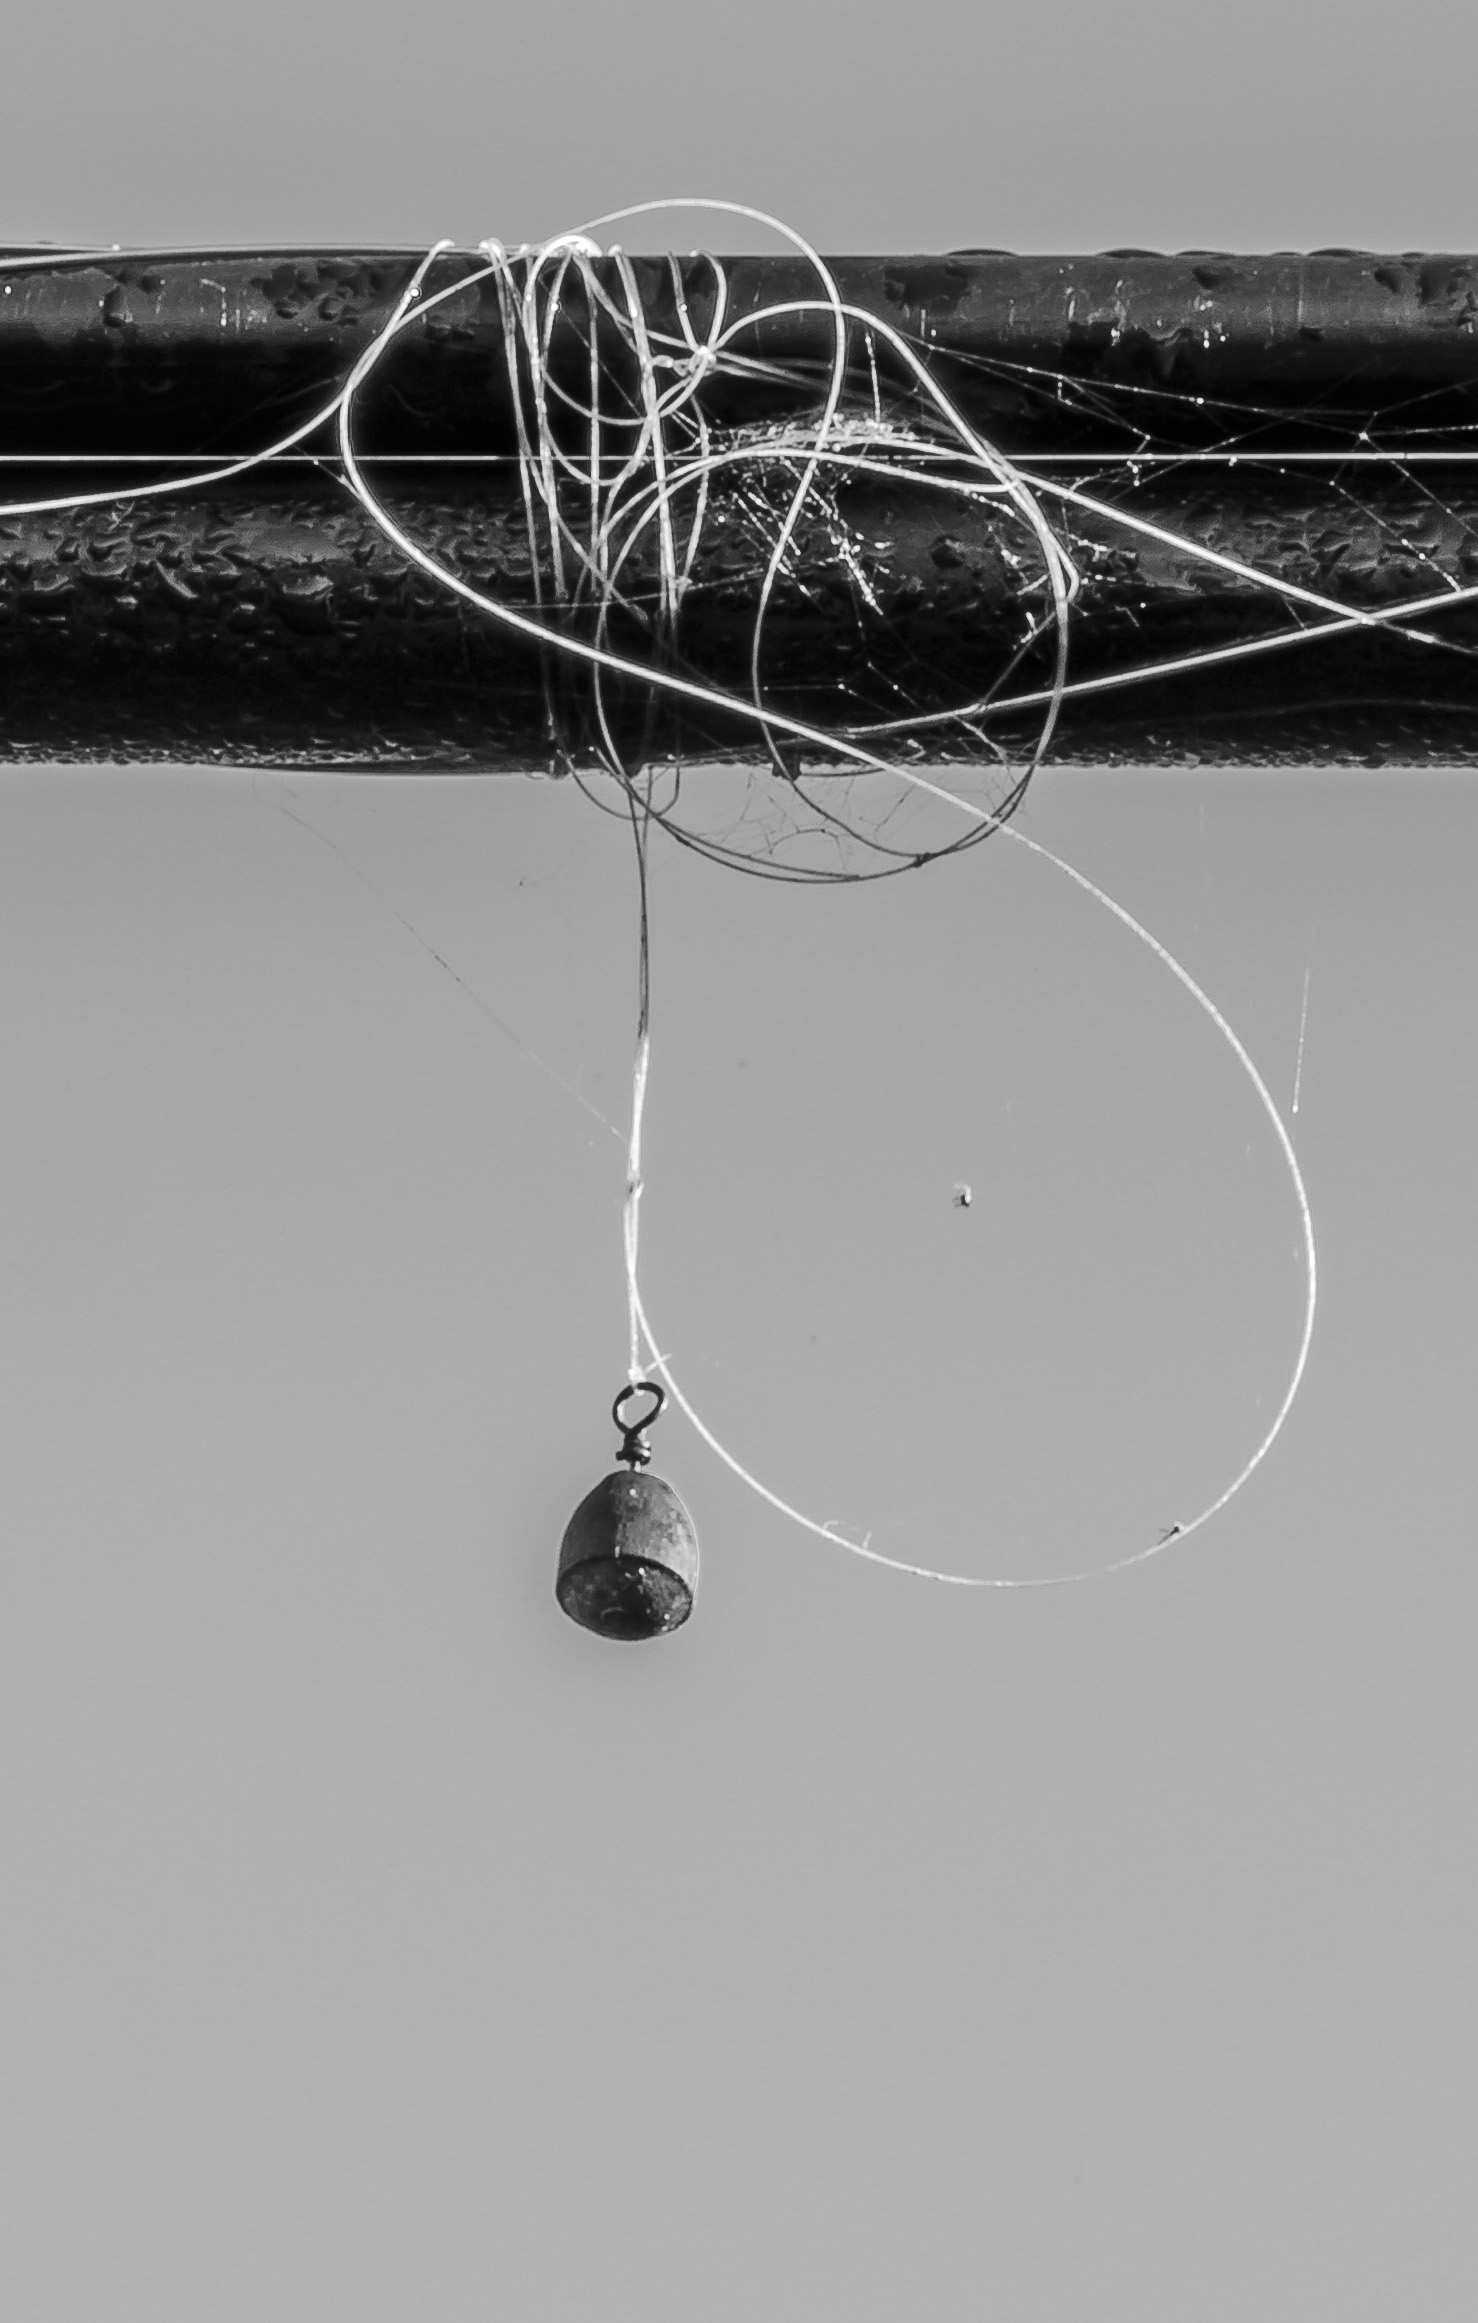 single fishing weight hanging from fishing line tangled around utility wire